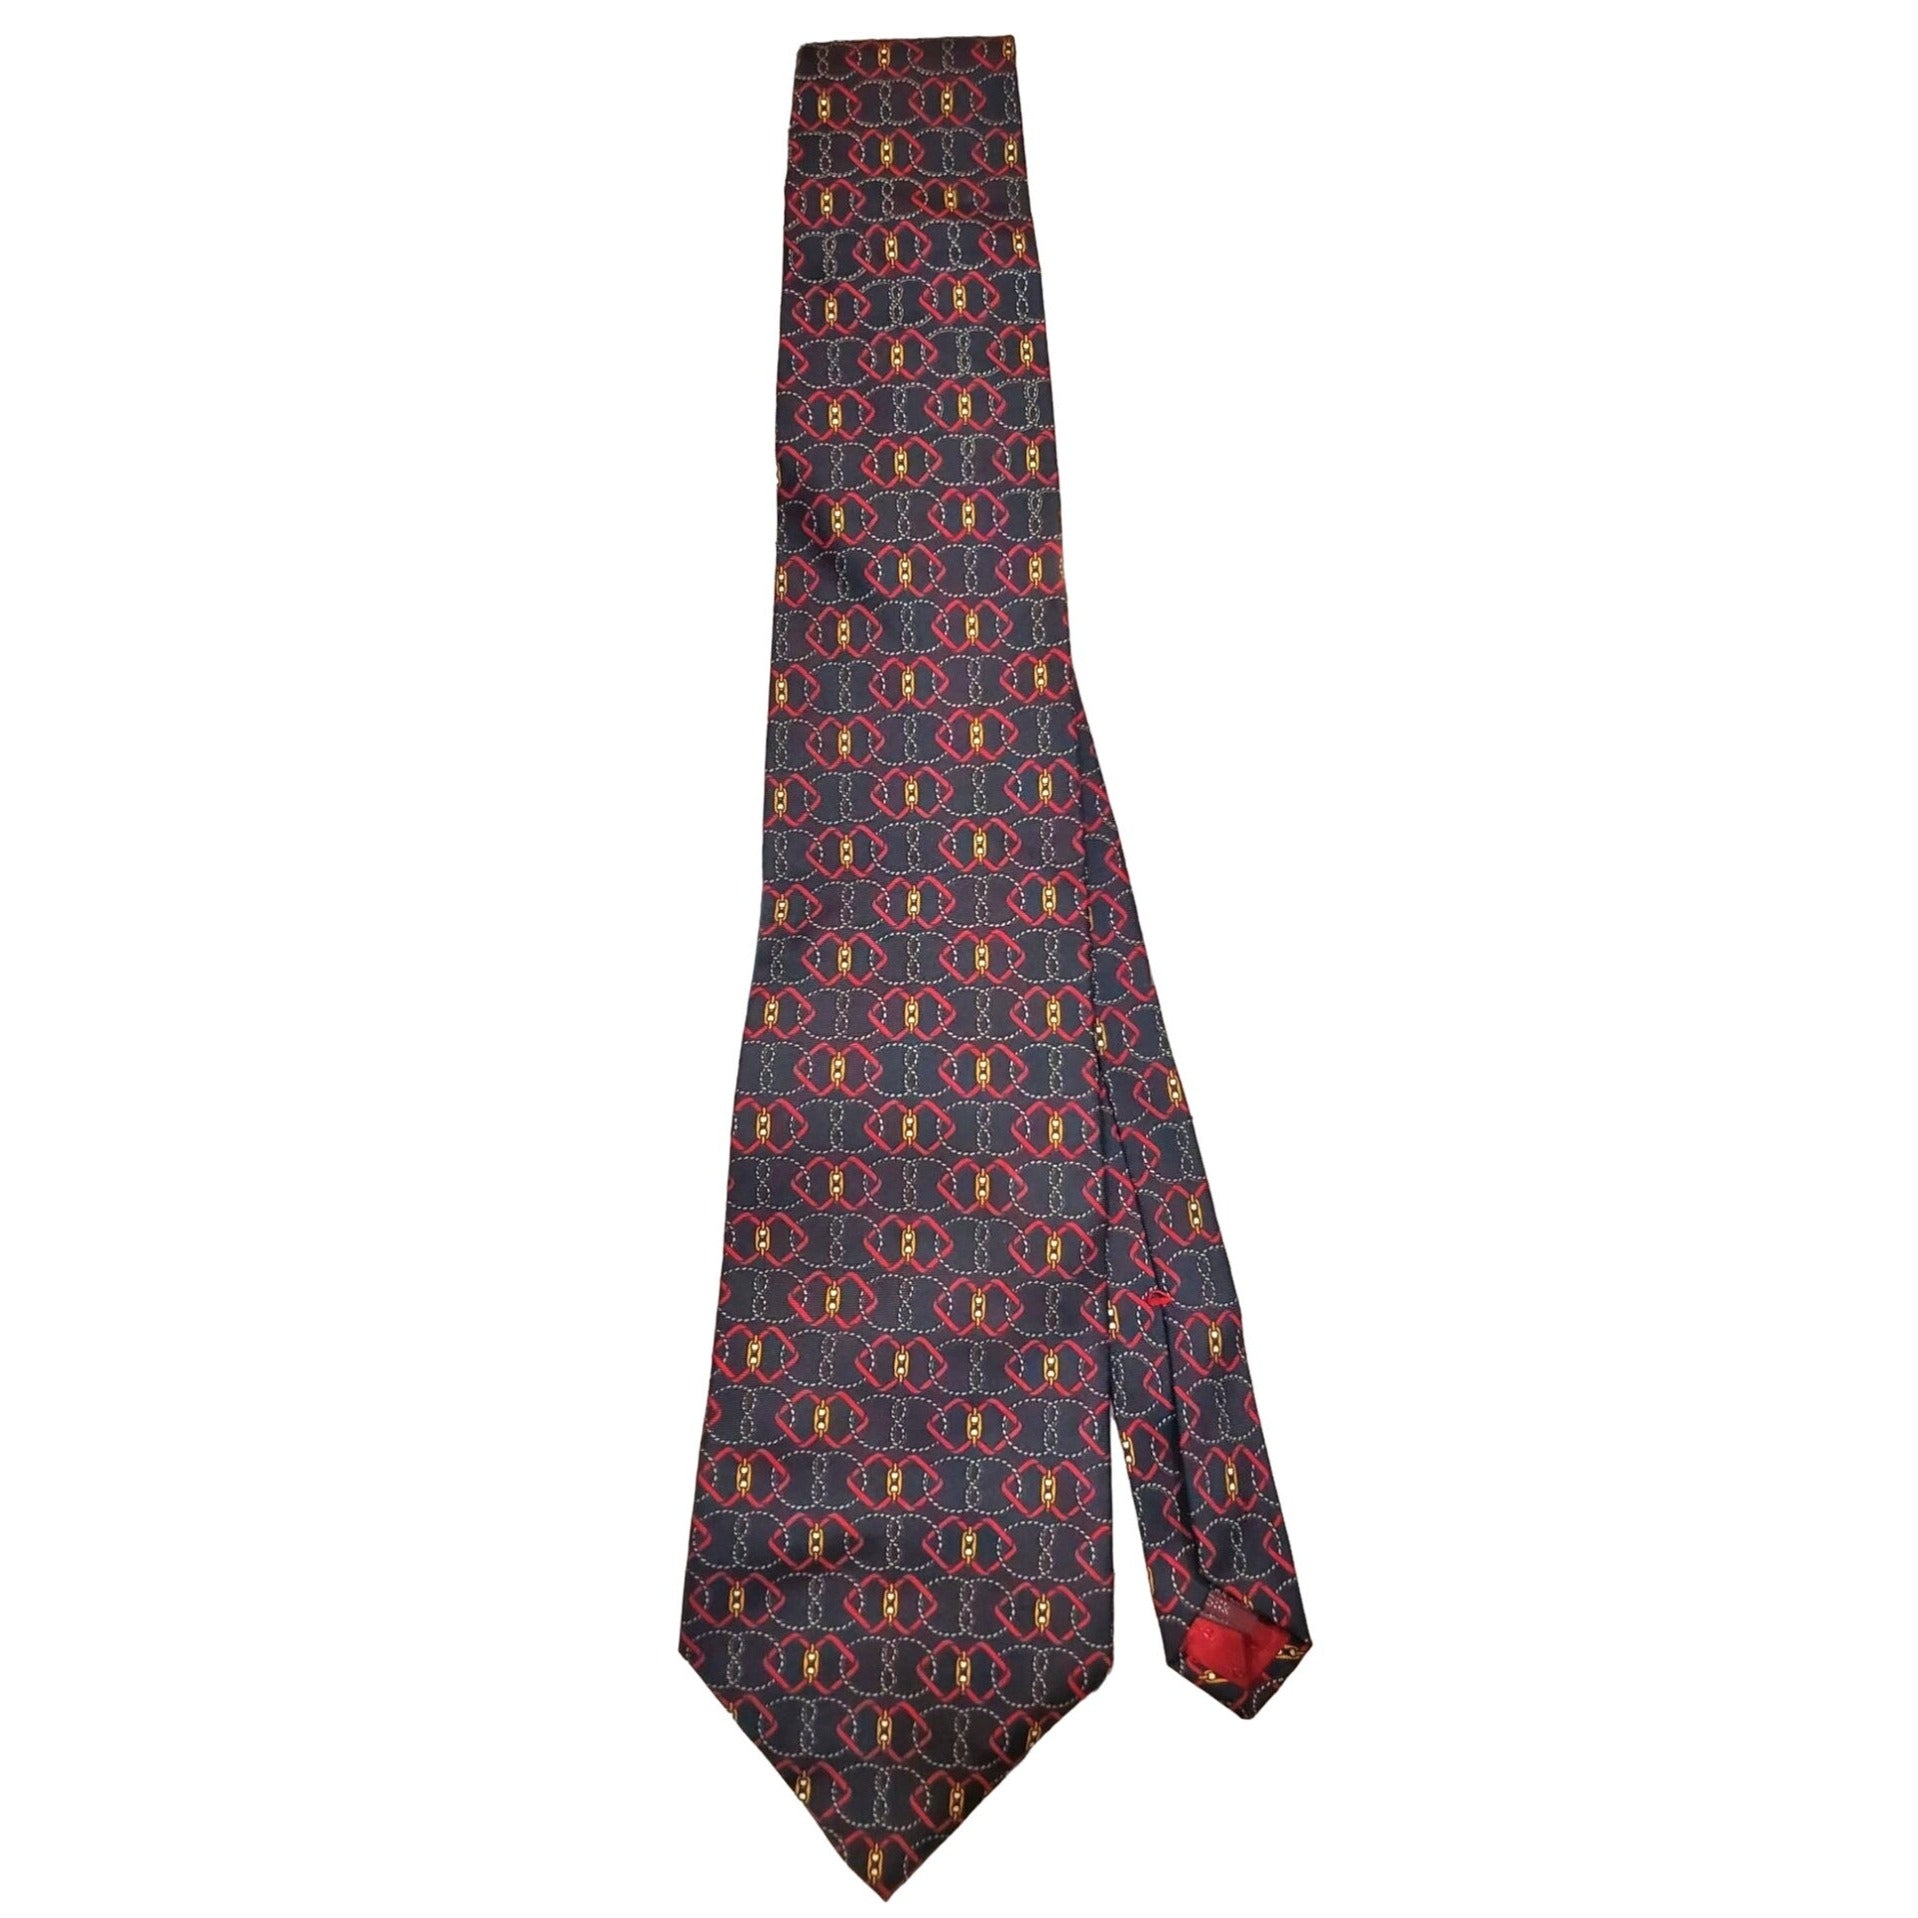 Halston Black and Red Men's Tie, 55 in. Long